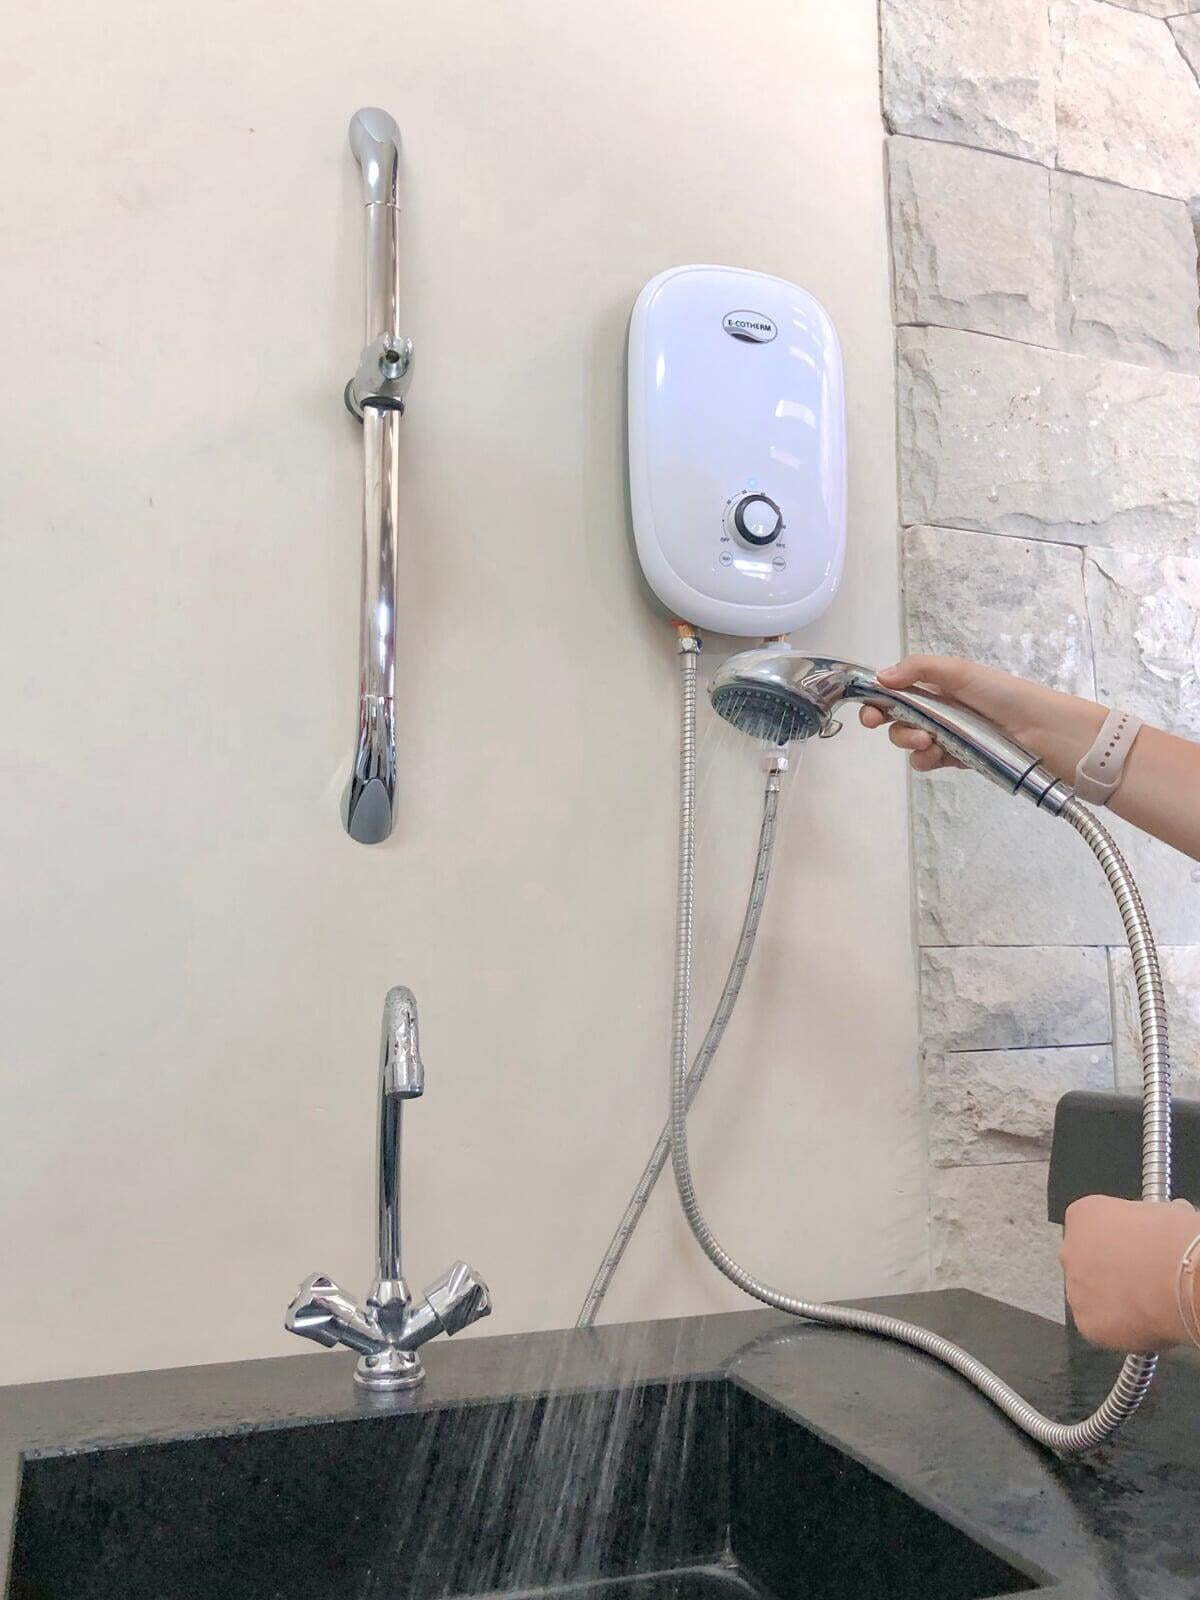 A woman holding a rose shower head connected to the e-cotherm tankless water heater